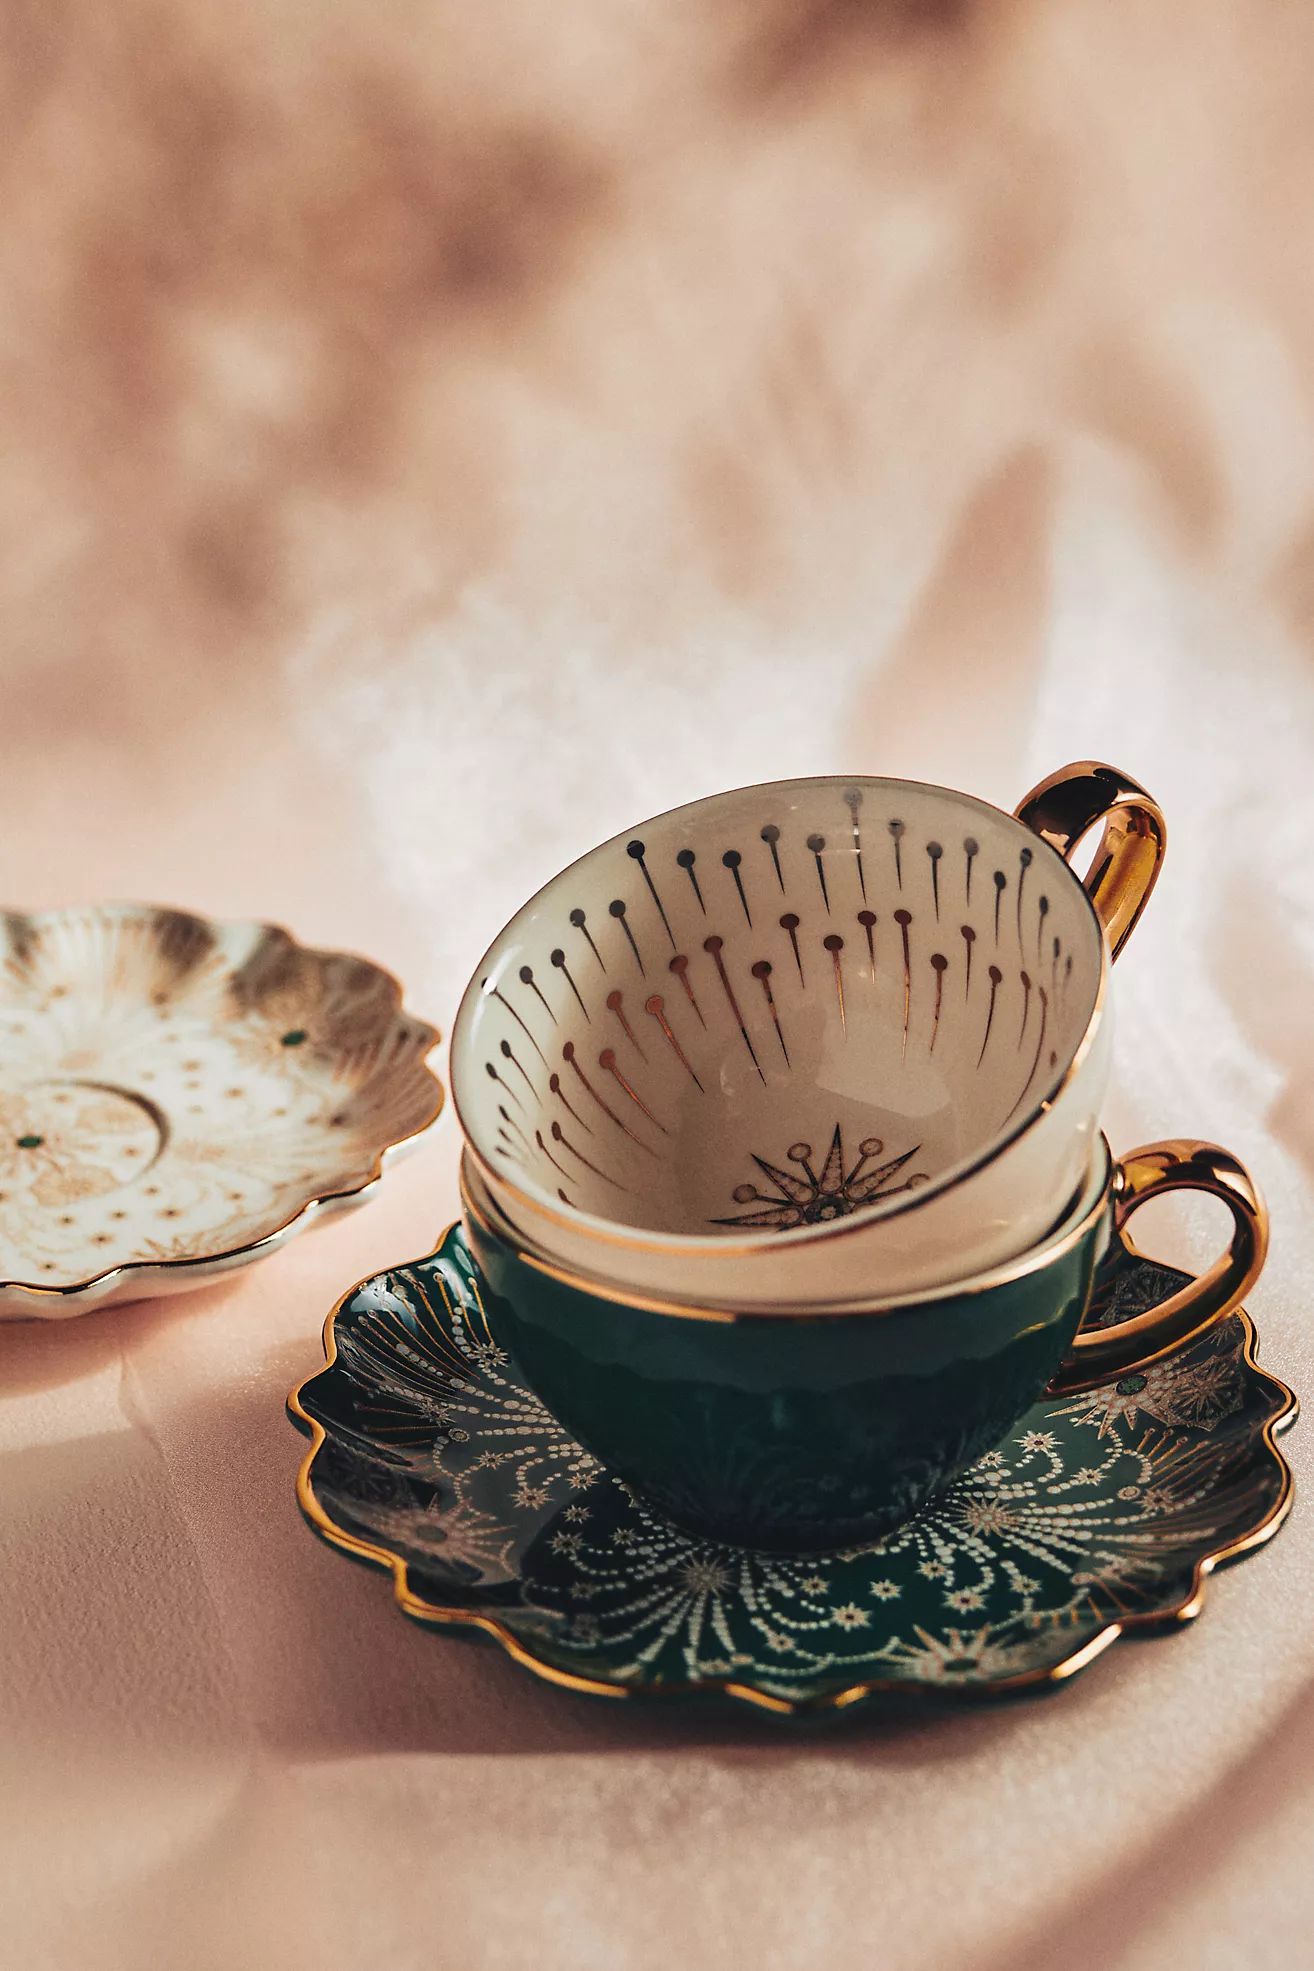 Catherine Martin for Anthropologie Starry Night Teacup & Saucer | Anthropologie (UK)